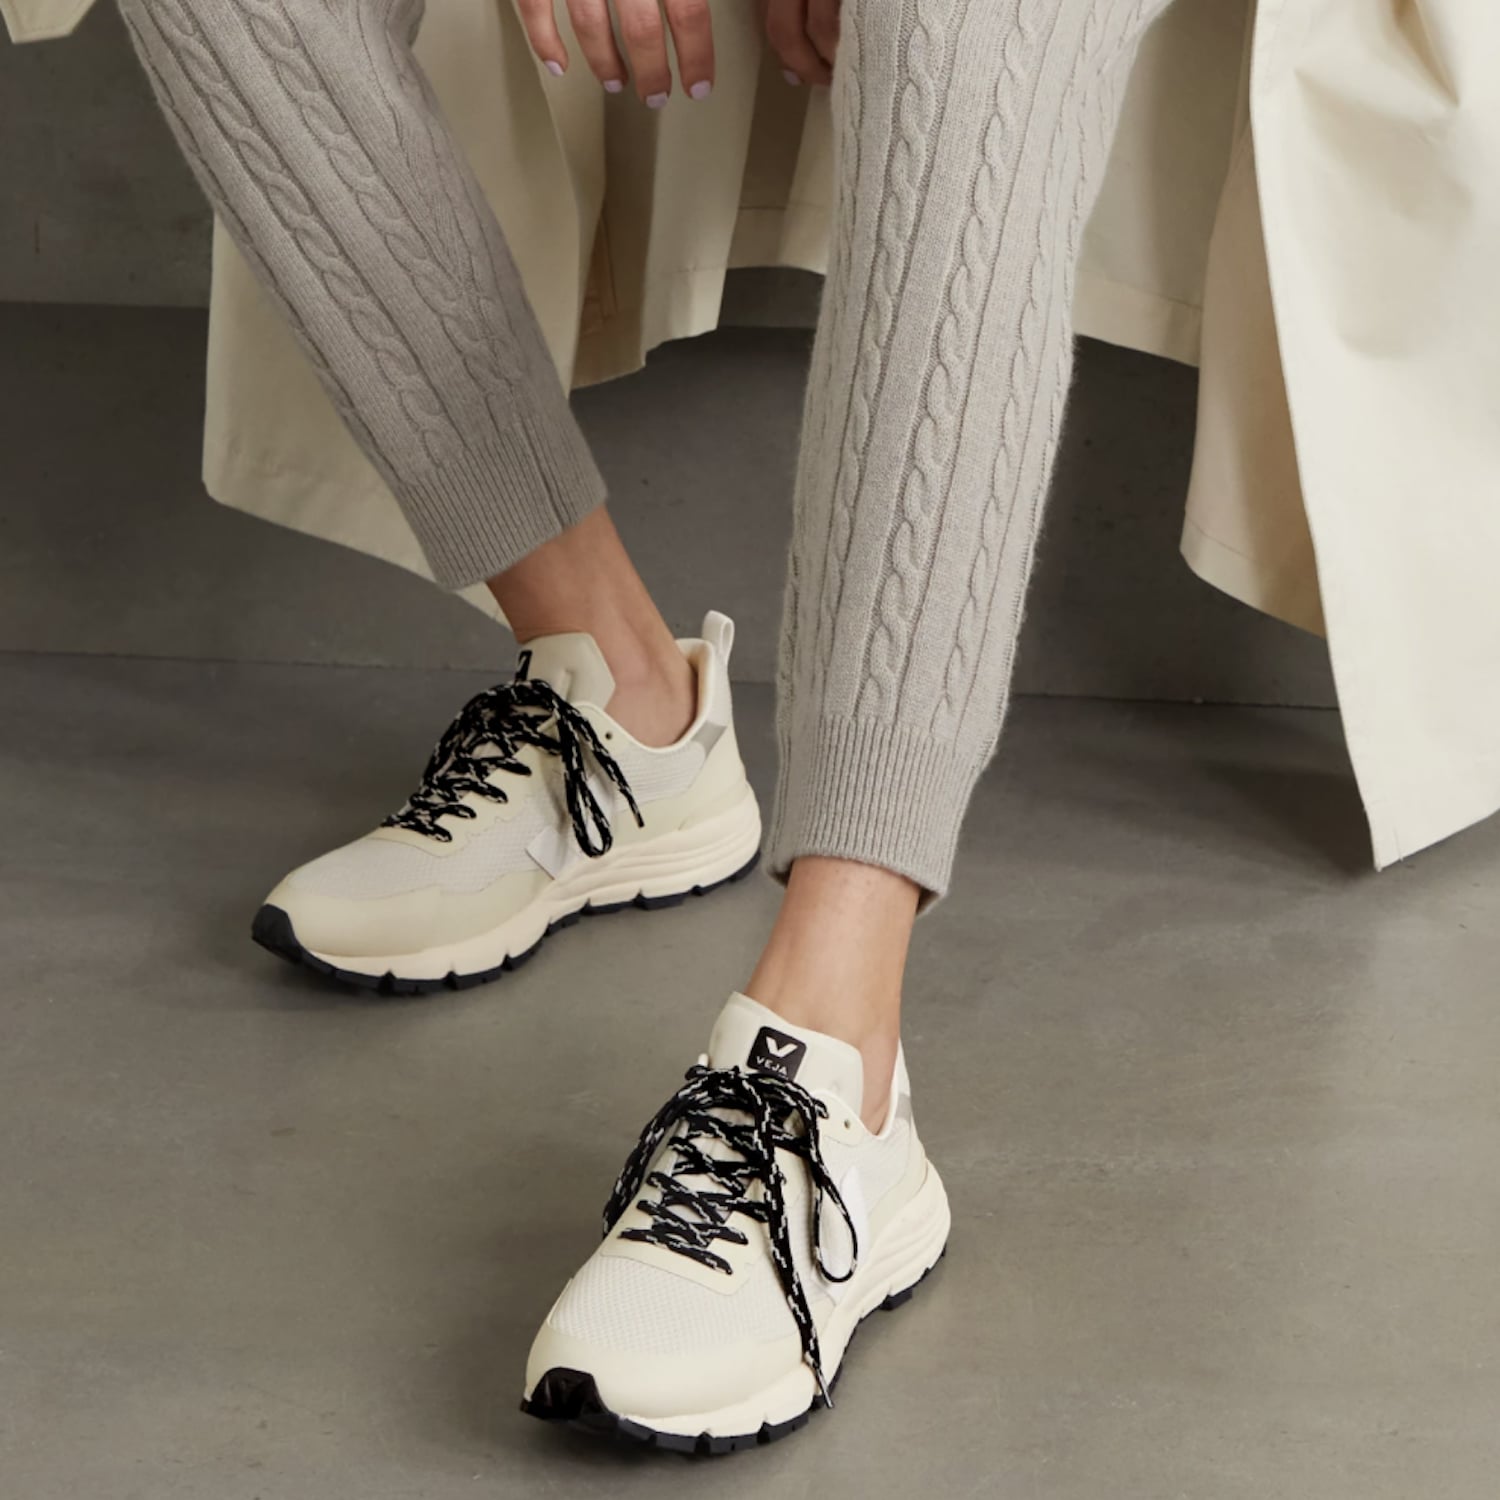 Facet excitement Dwell Most Stylish and Comfortable Walking Shoes 2023 | POPSUGAR Fashion